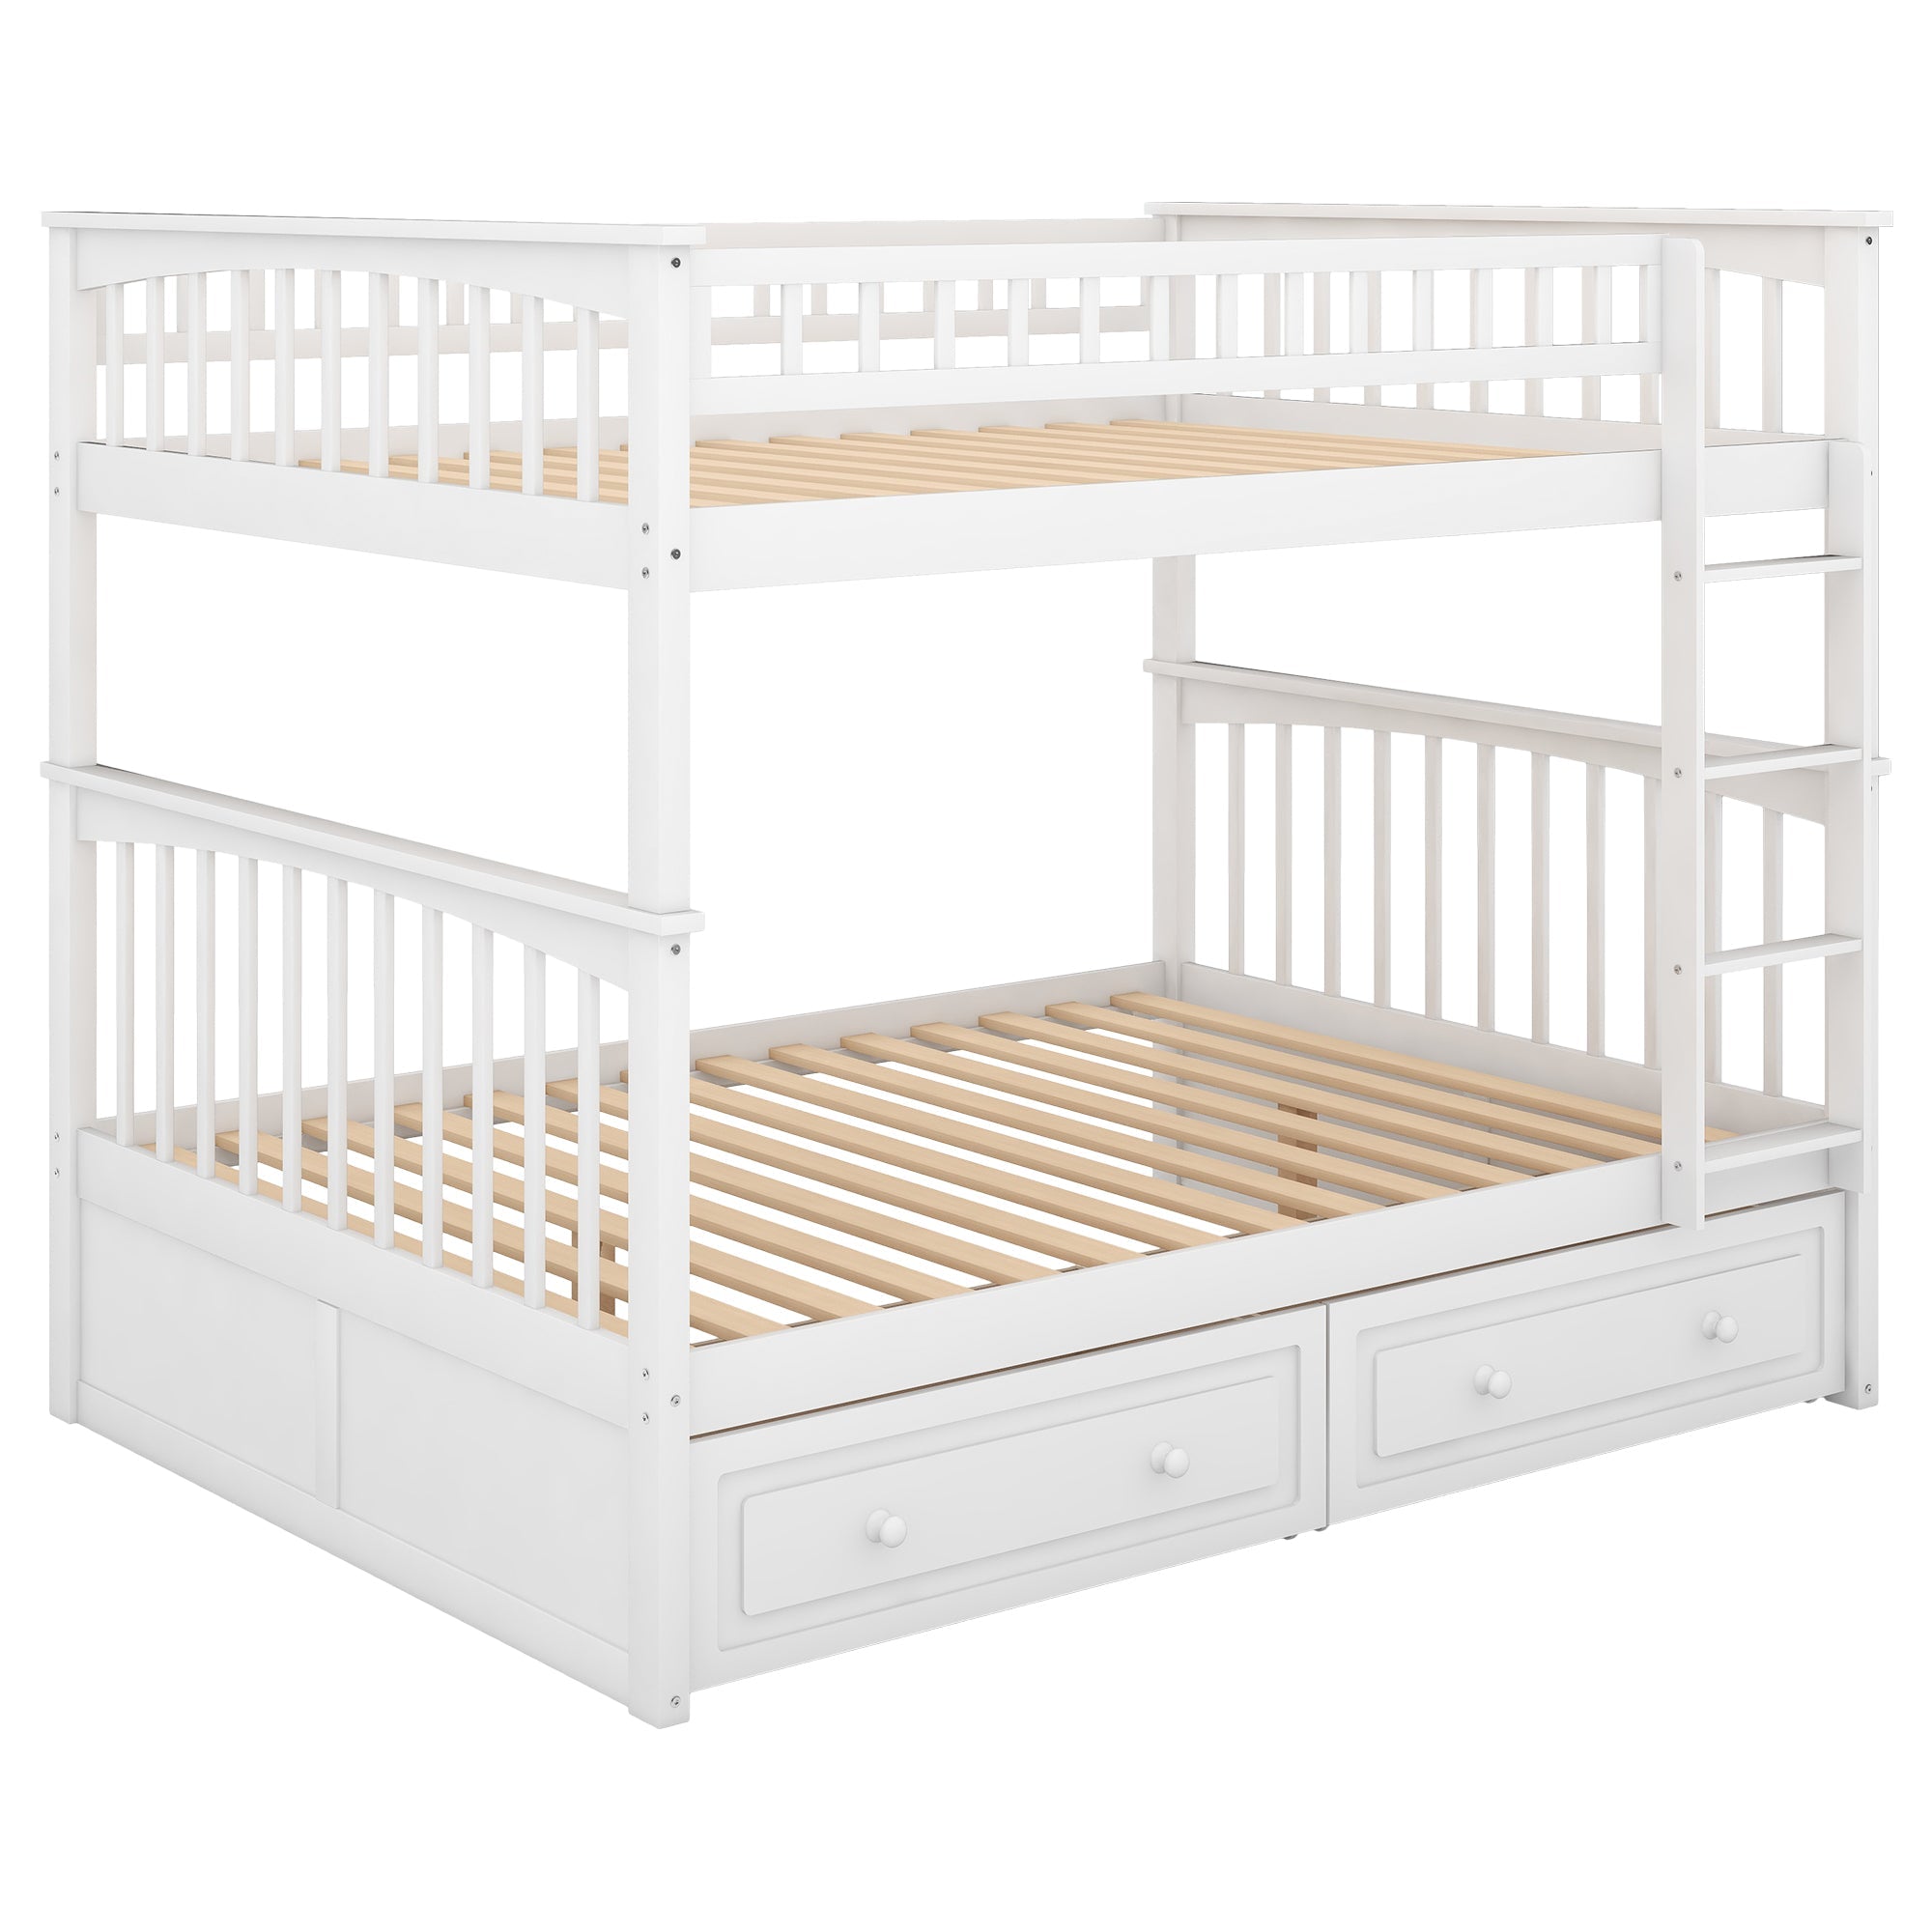 Euroco Pine Wood Bunk Bed With Storage, Full-Over-Full, White